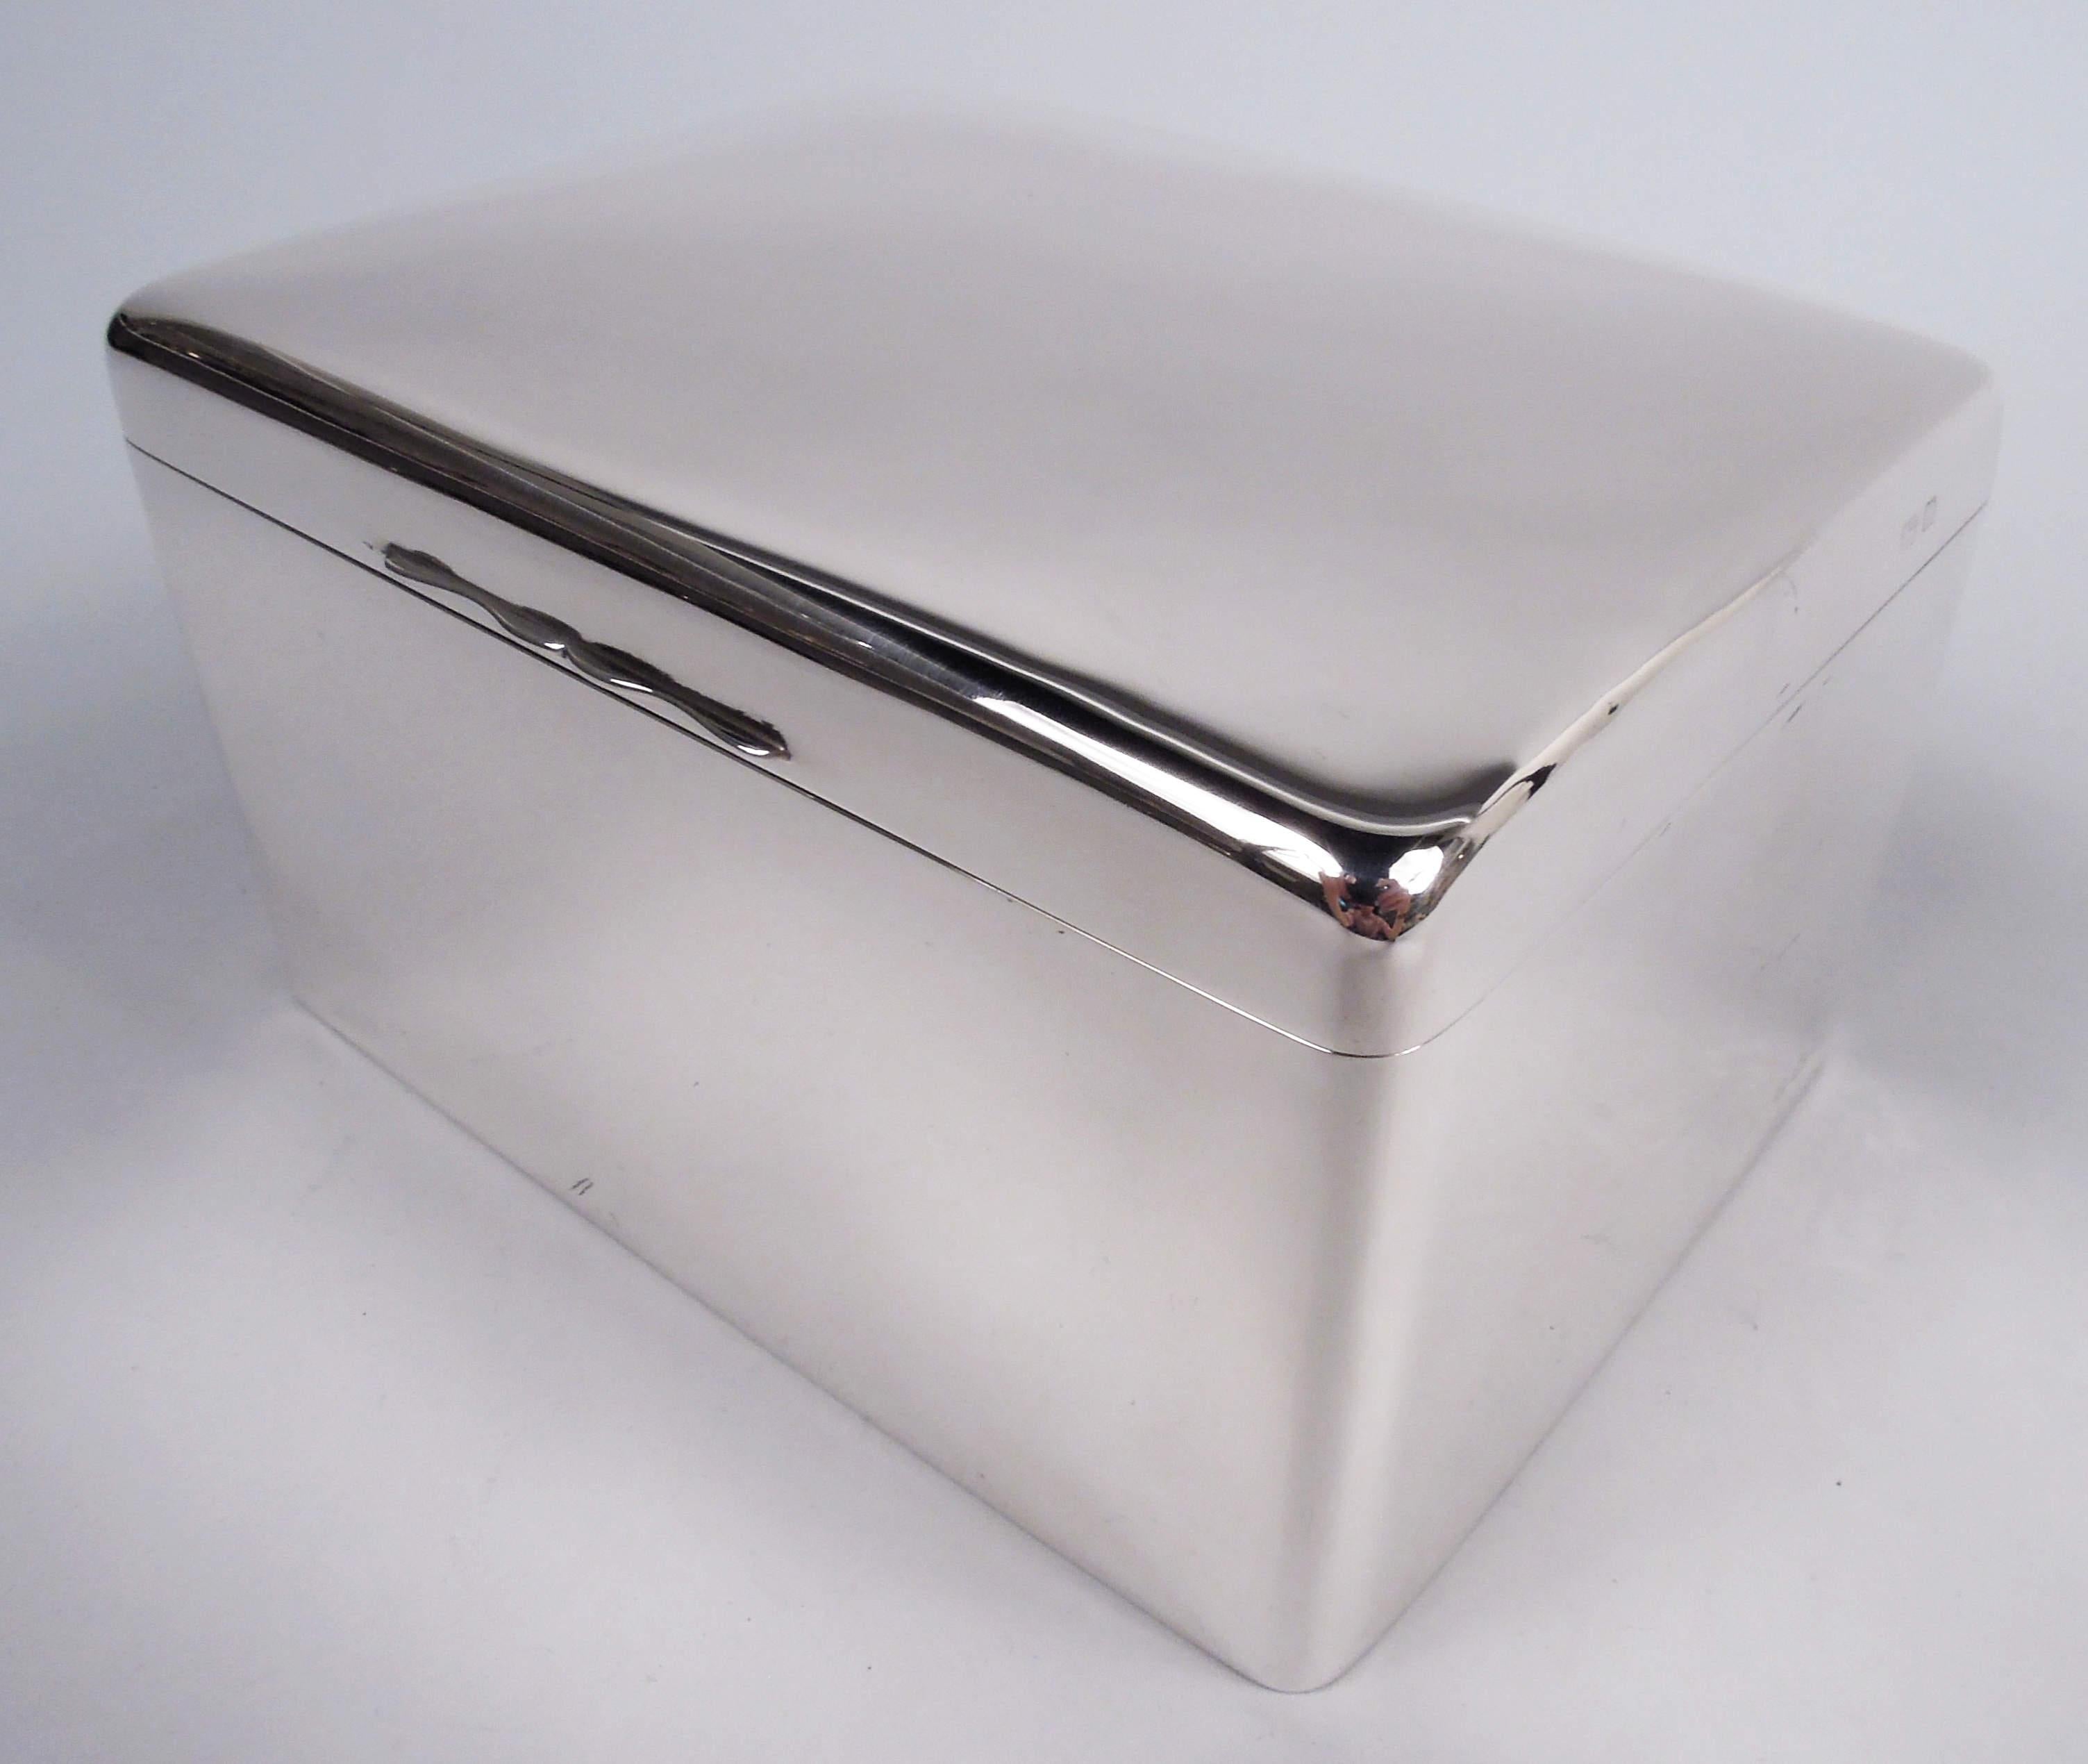 George V sterling silver box. Made by Asprey in Birmingham in 1928. Rectangular with curved corners. Cover hinged with gently curved top and scrolled tab. Box interior cedar lined. Cover interior gilt-washed. Leather-lined underside. Fully marked.